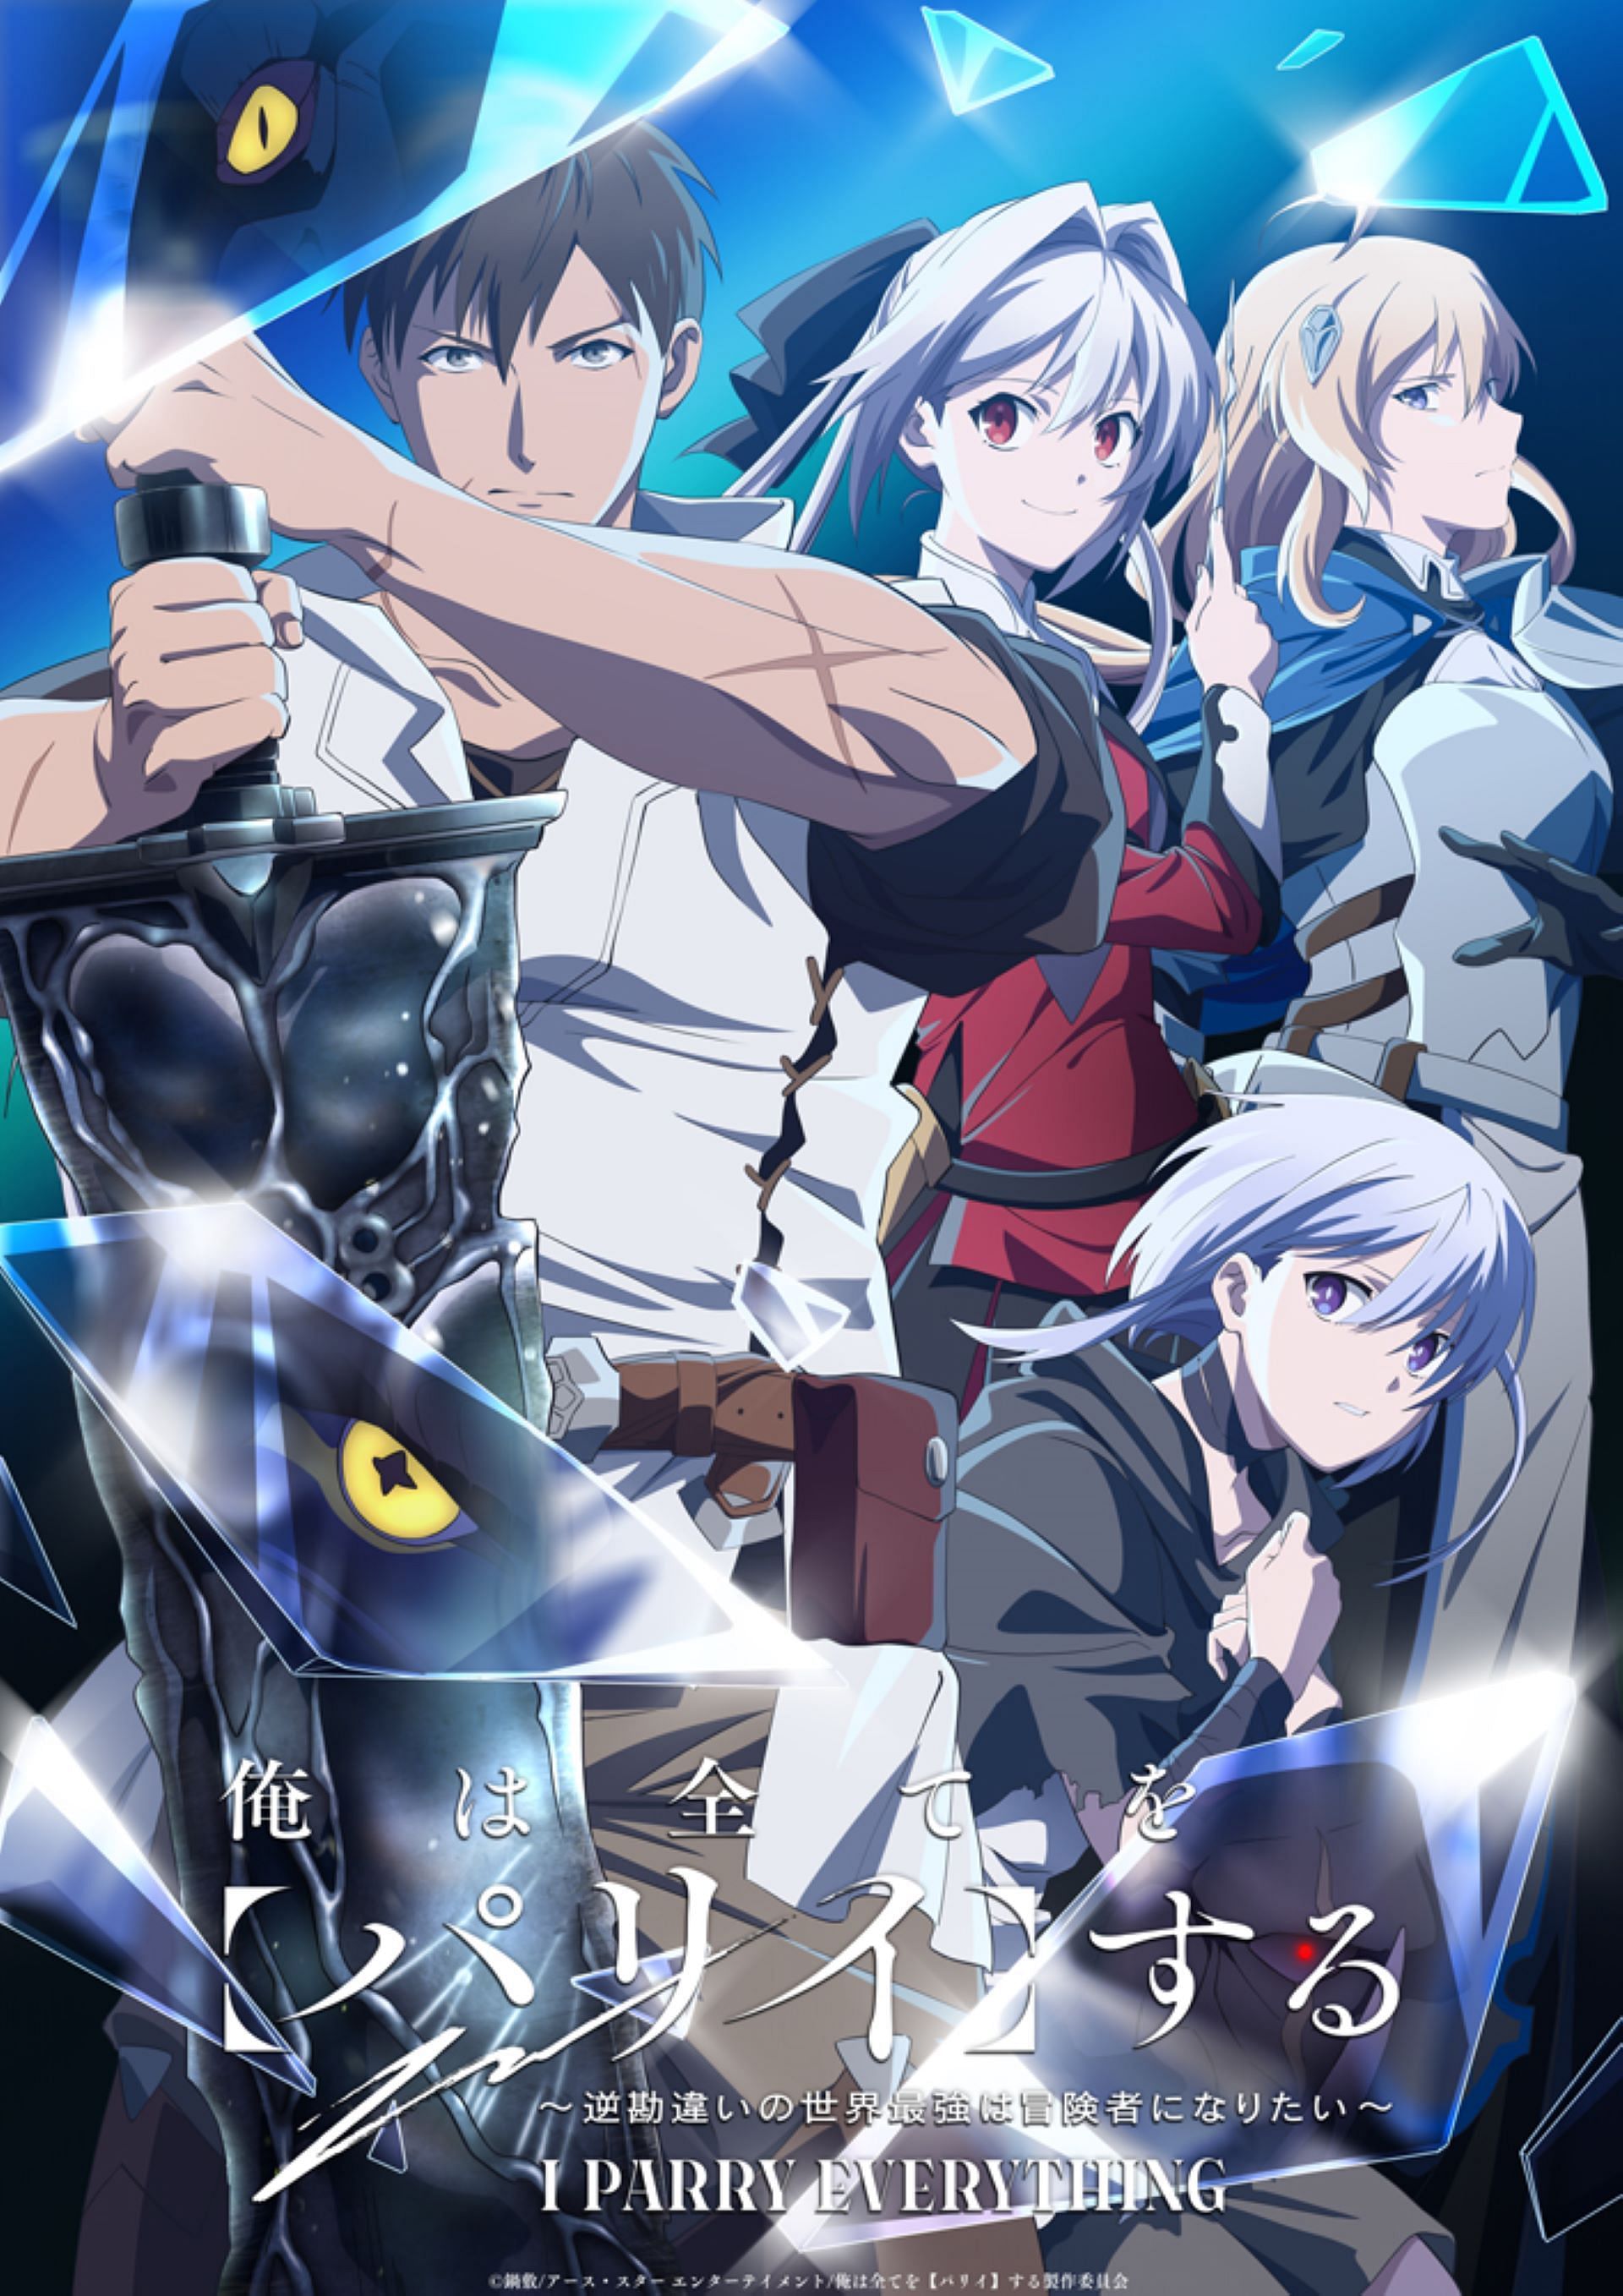 The key visual for I Parry Everything anime (Image via OLM Studios)